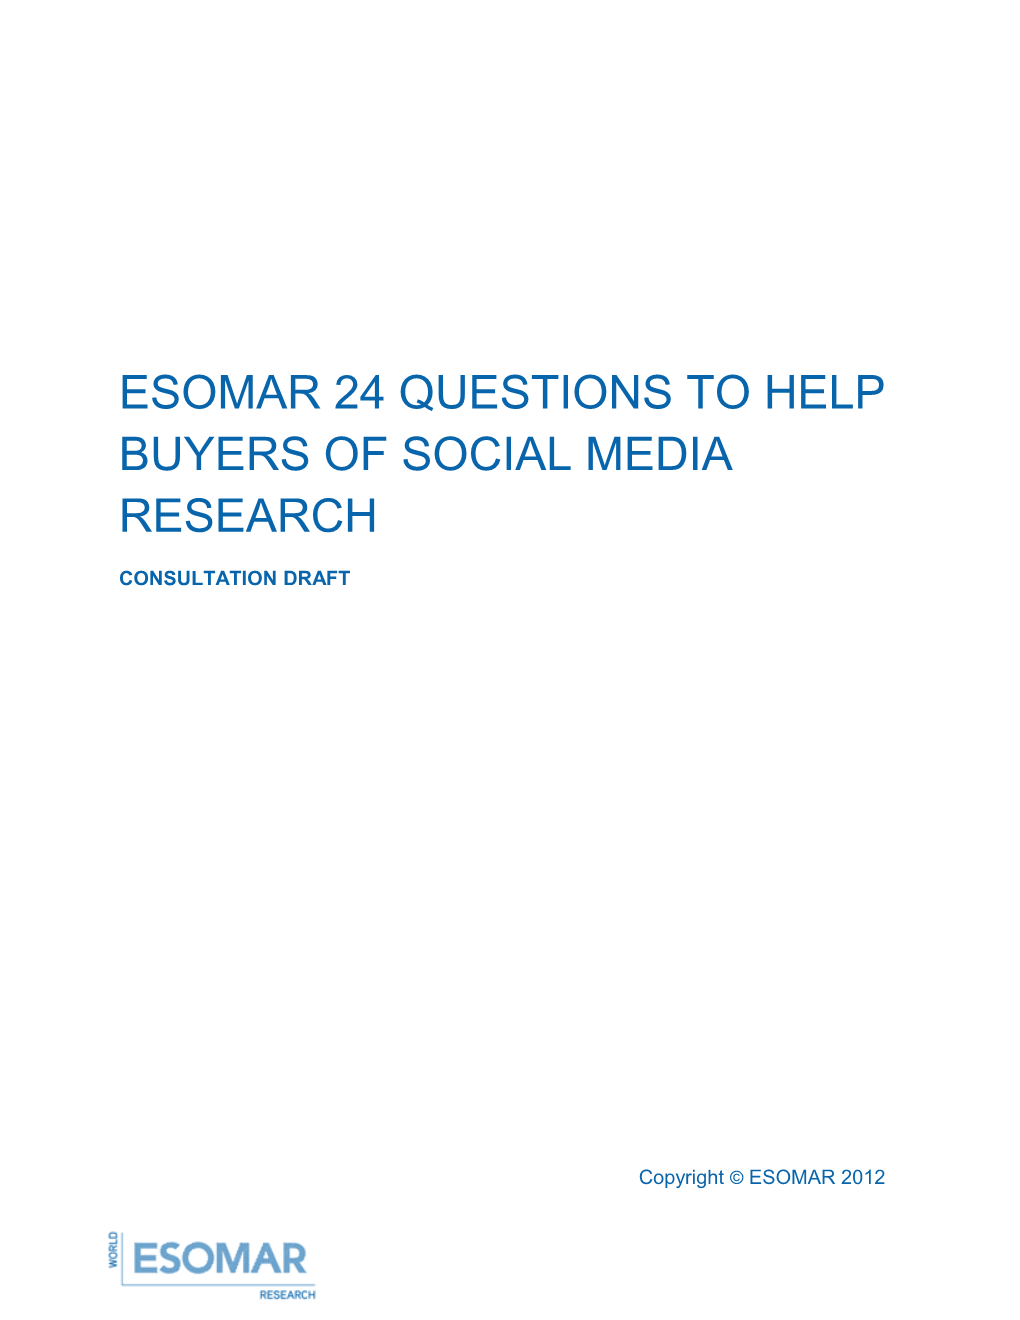 ESOMAR 26 Questions to Help Social Media Research Buyers